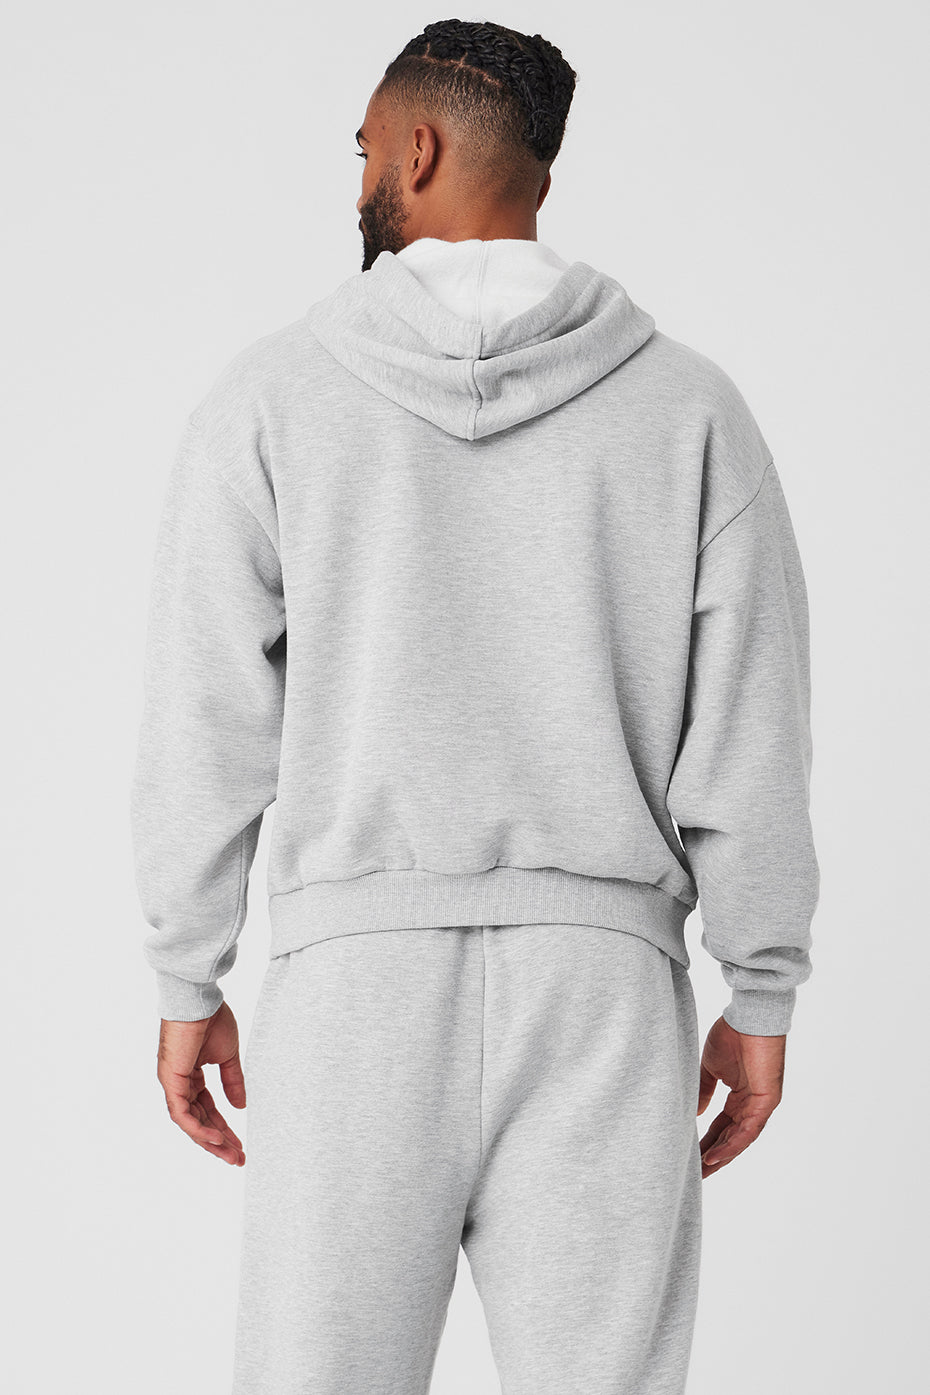 Only 51.20 usd for Accolade Hoodie - Athletic Heather Grey Online at the  Shop